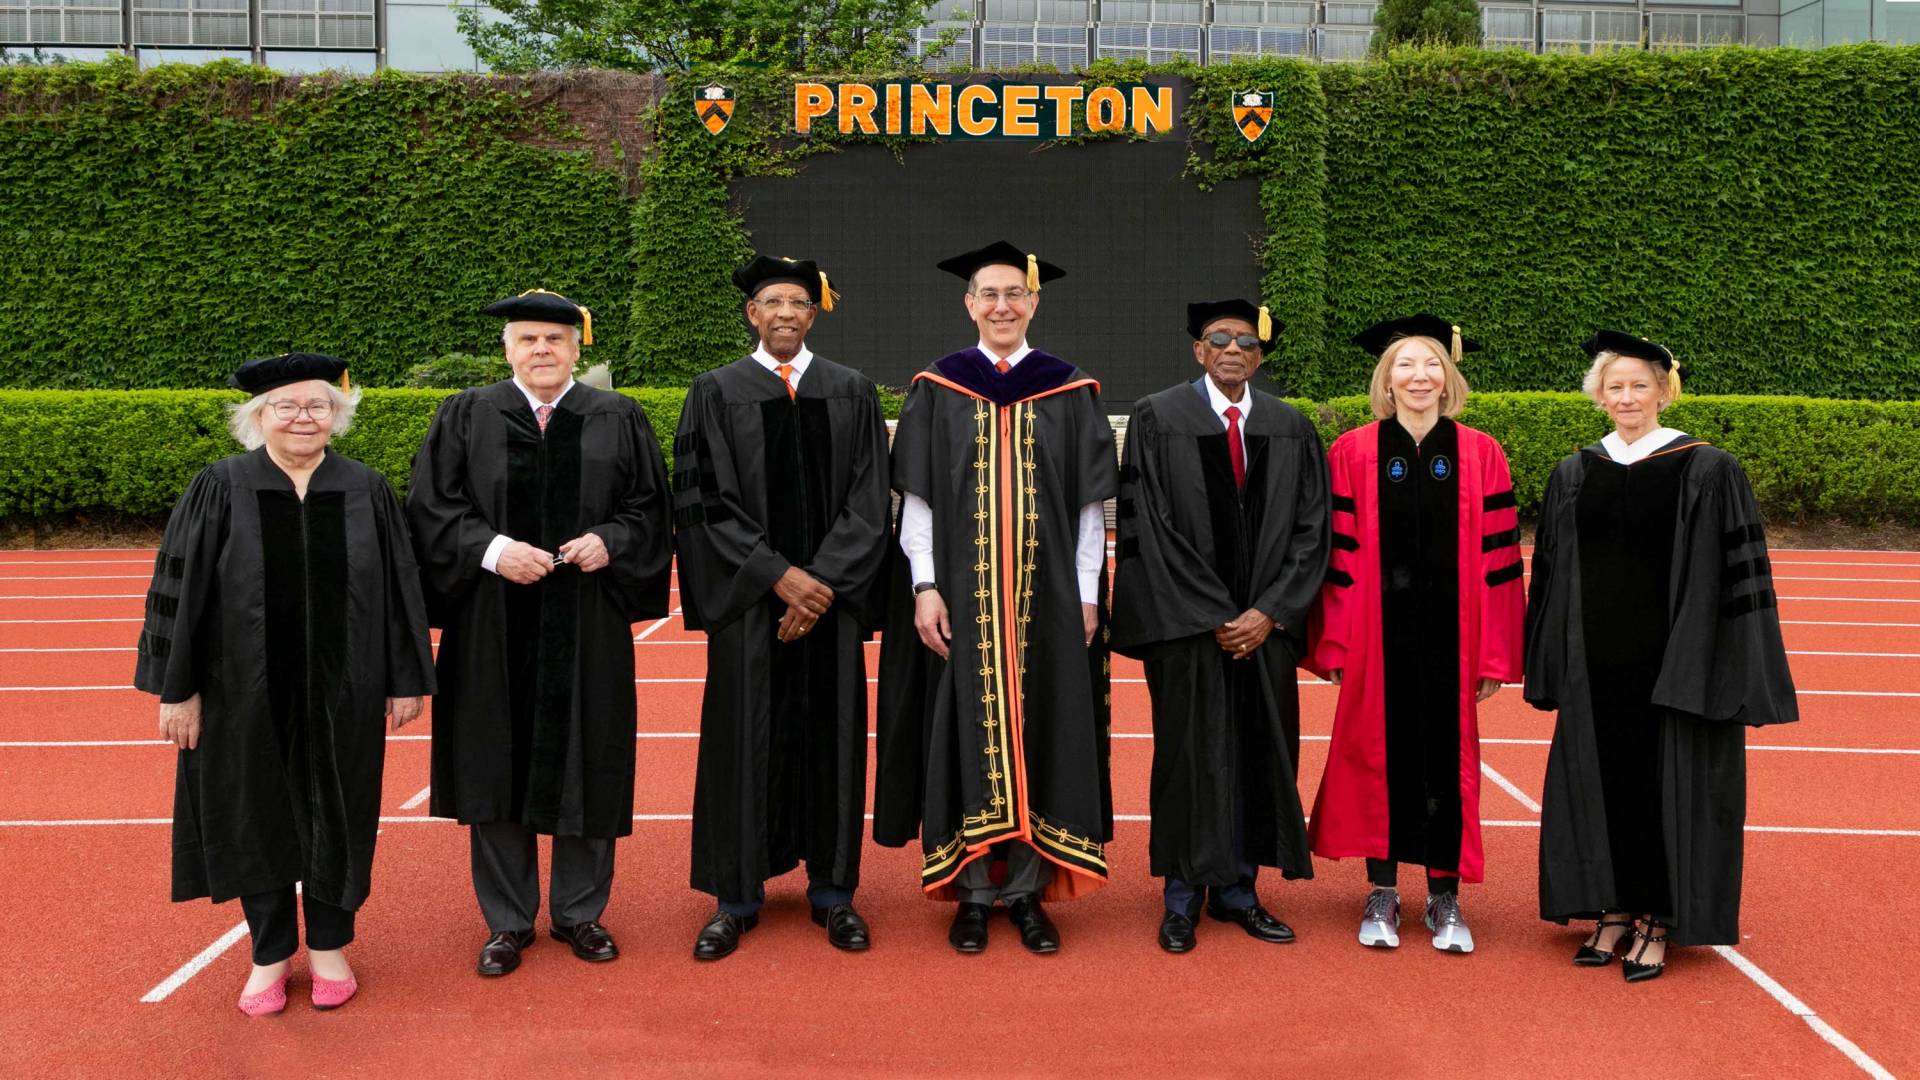 Honorary degree recipients and Christopher Eisgruber on Weaver Track